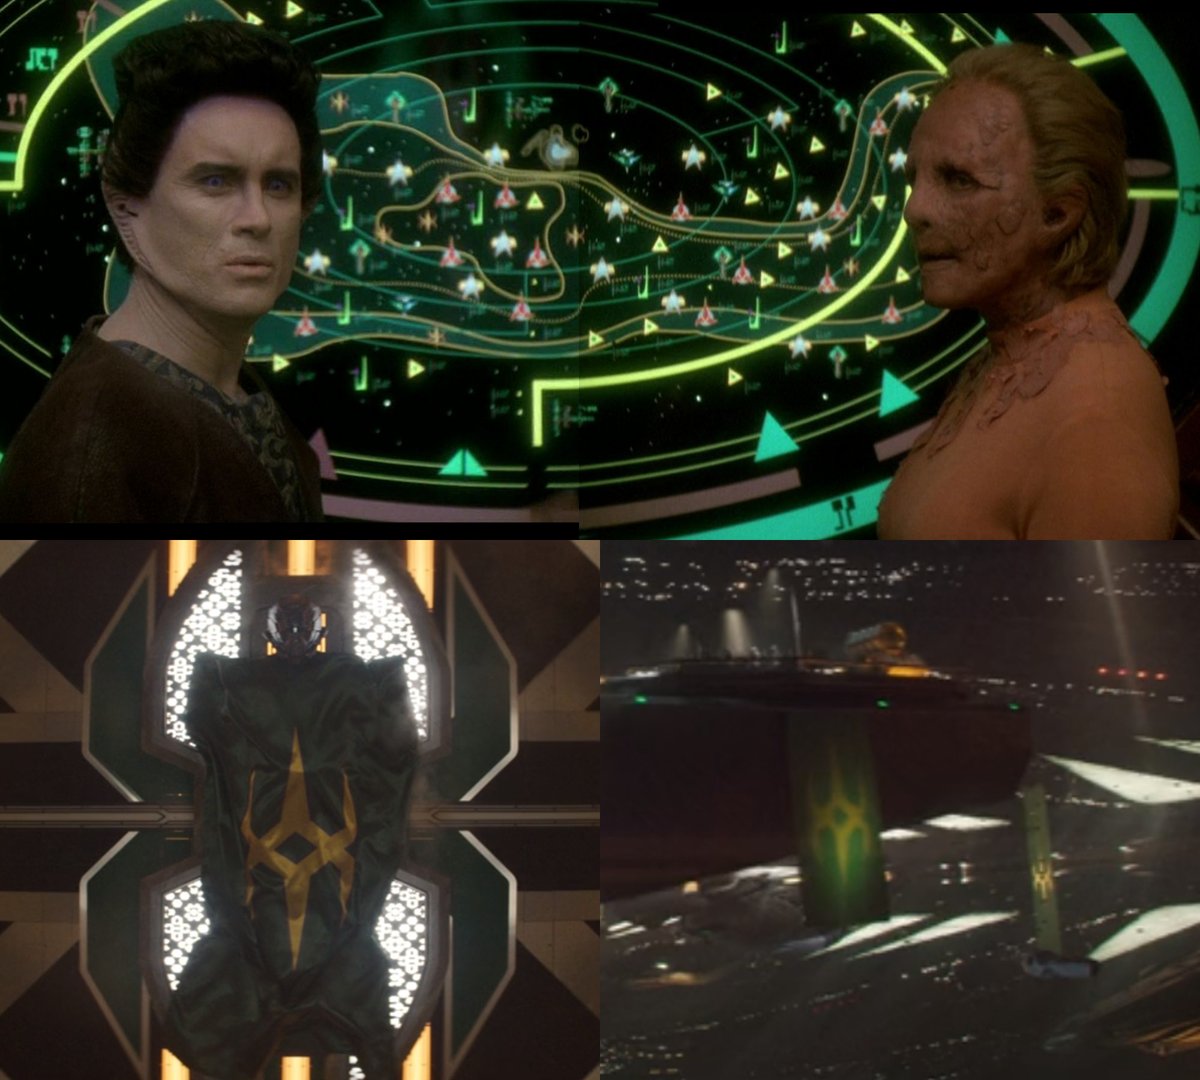 Between #StarTrekTNG's 'The Loss' in 1990 and the end of #StarTrekENT in 2005, all we saw of the Breen emblem were these tiny, blurry logos in #StarTrekDS9's 'The Dogs of War'⬆️. Now #StarTrekDiscovery's 'Labyrinths'⬇️ has given us a full Breen flag - I love it! :-)